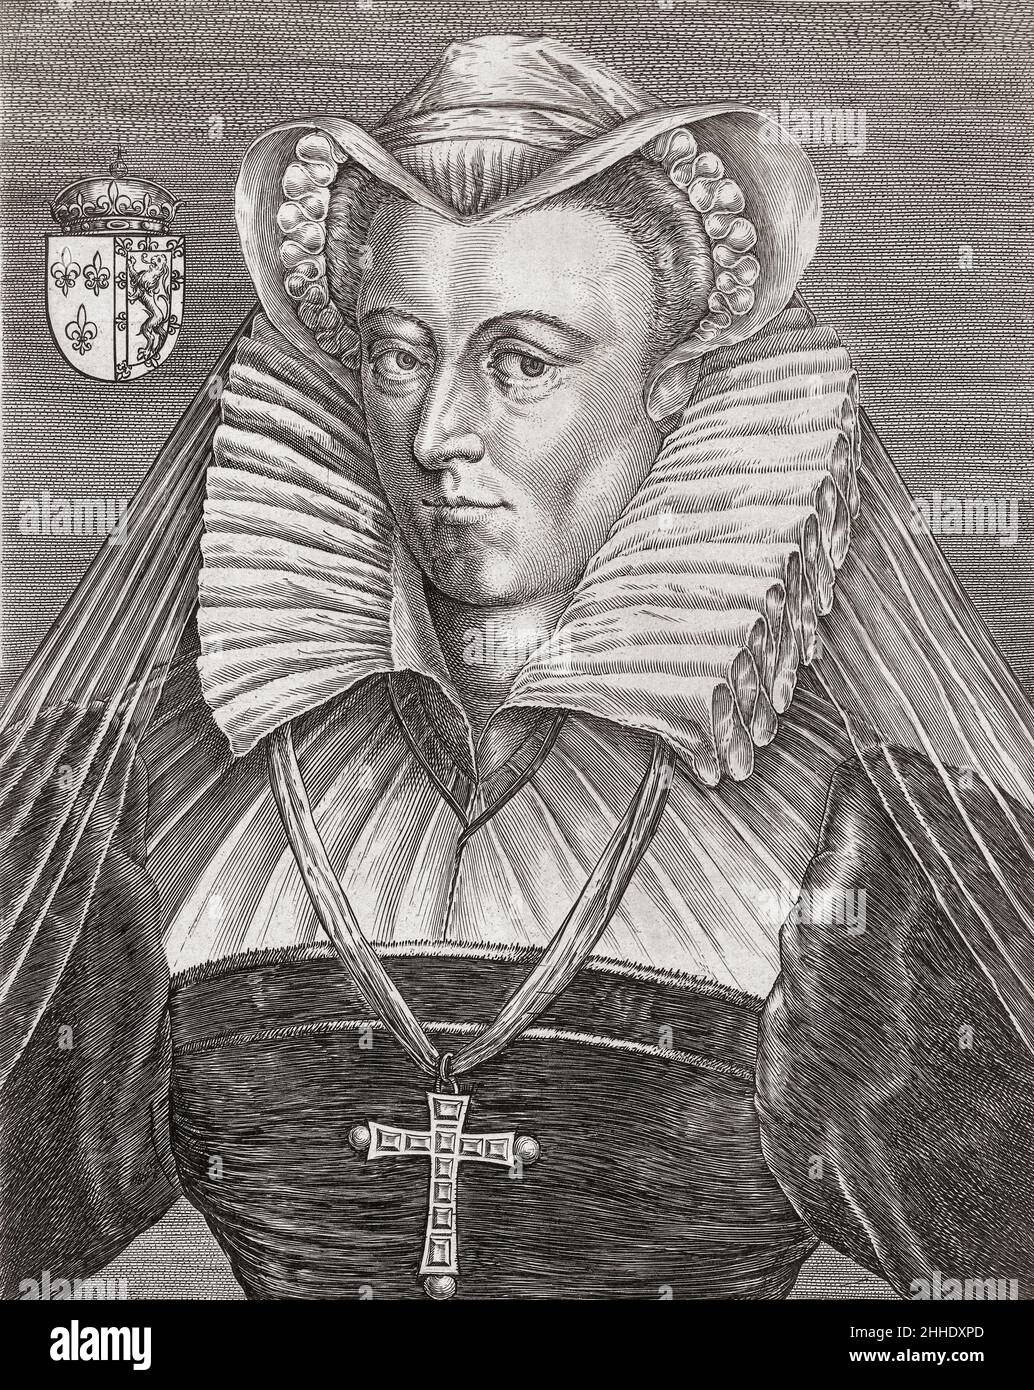 Mary, Queen of Scots, 1542 – 1587 aka Mary Stuart or Mary I of Scotland. Queen of Scotland and Queen consort of France.  After a work by an unidentified artist. Stock Photo